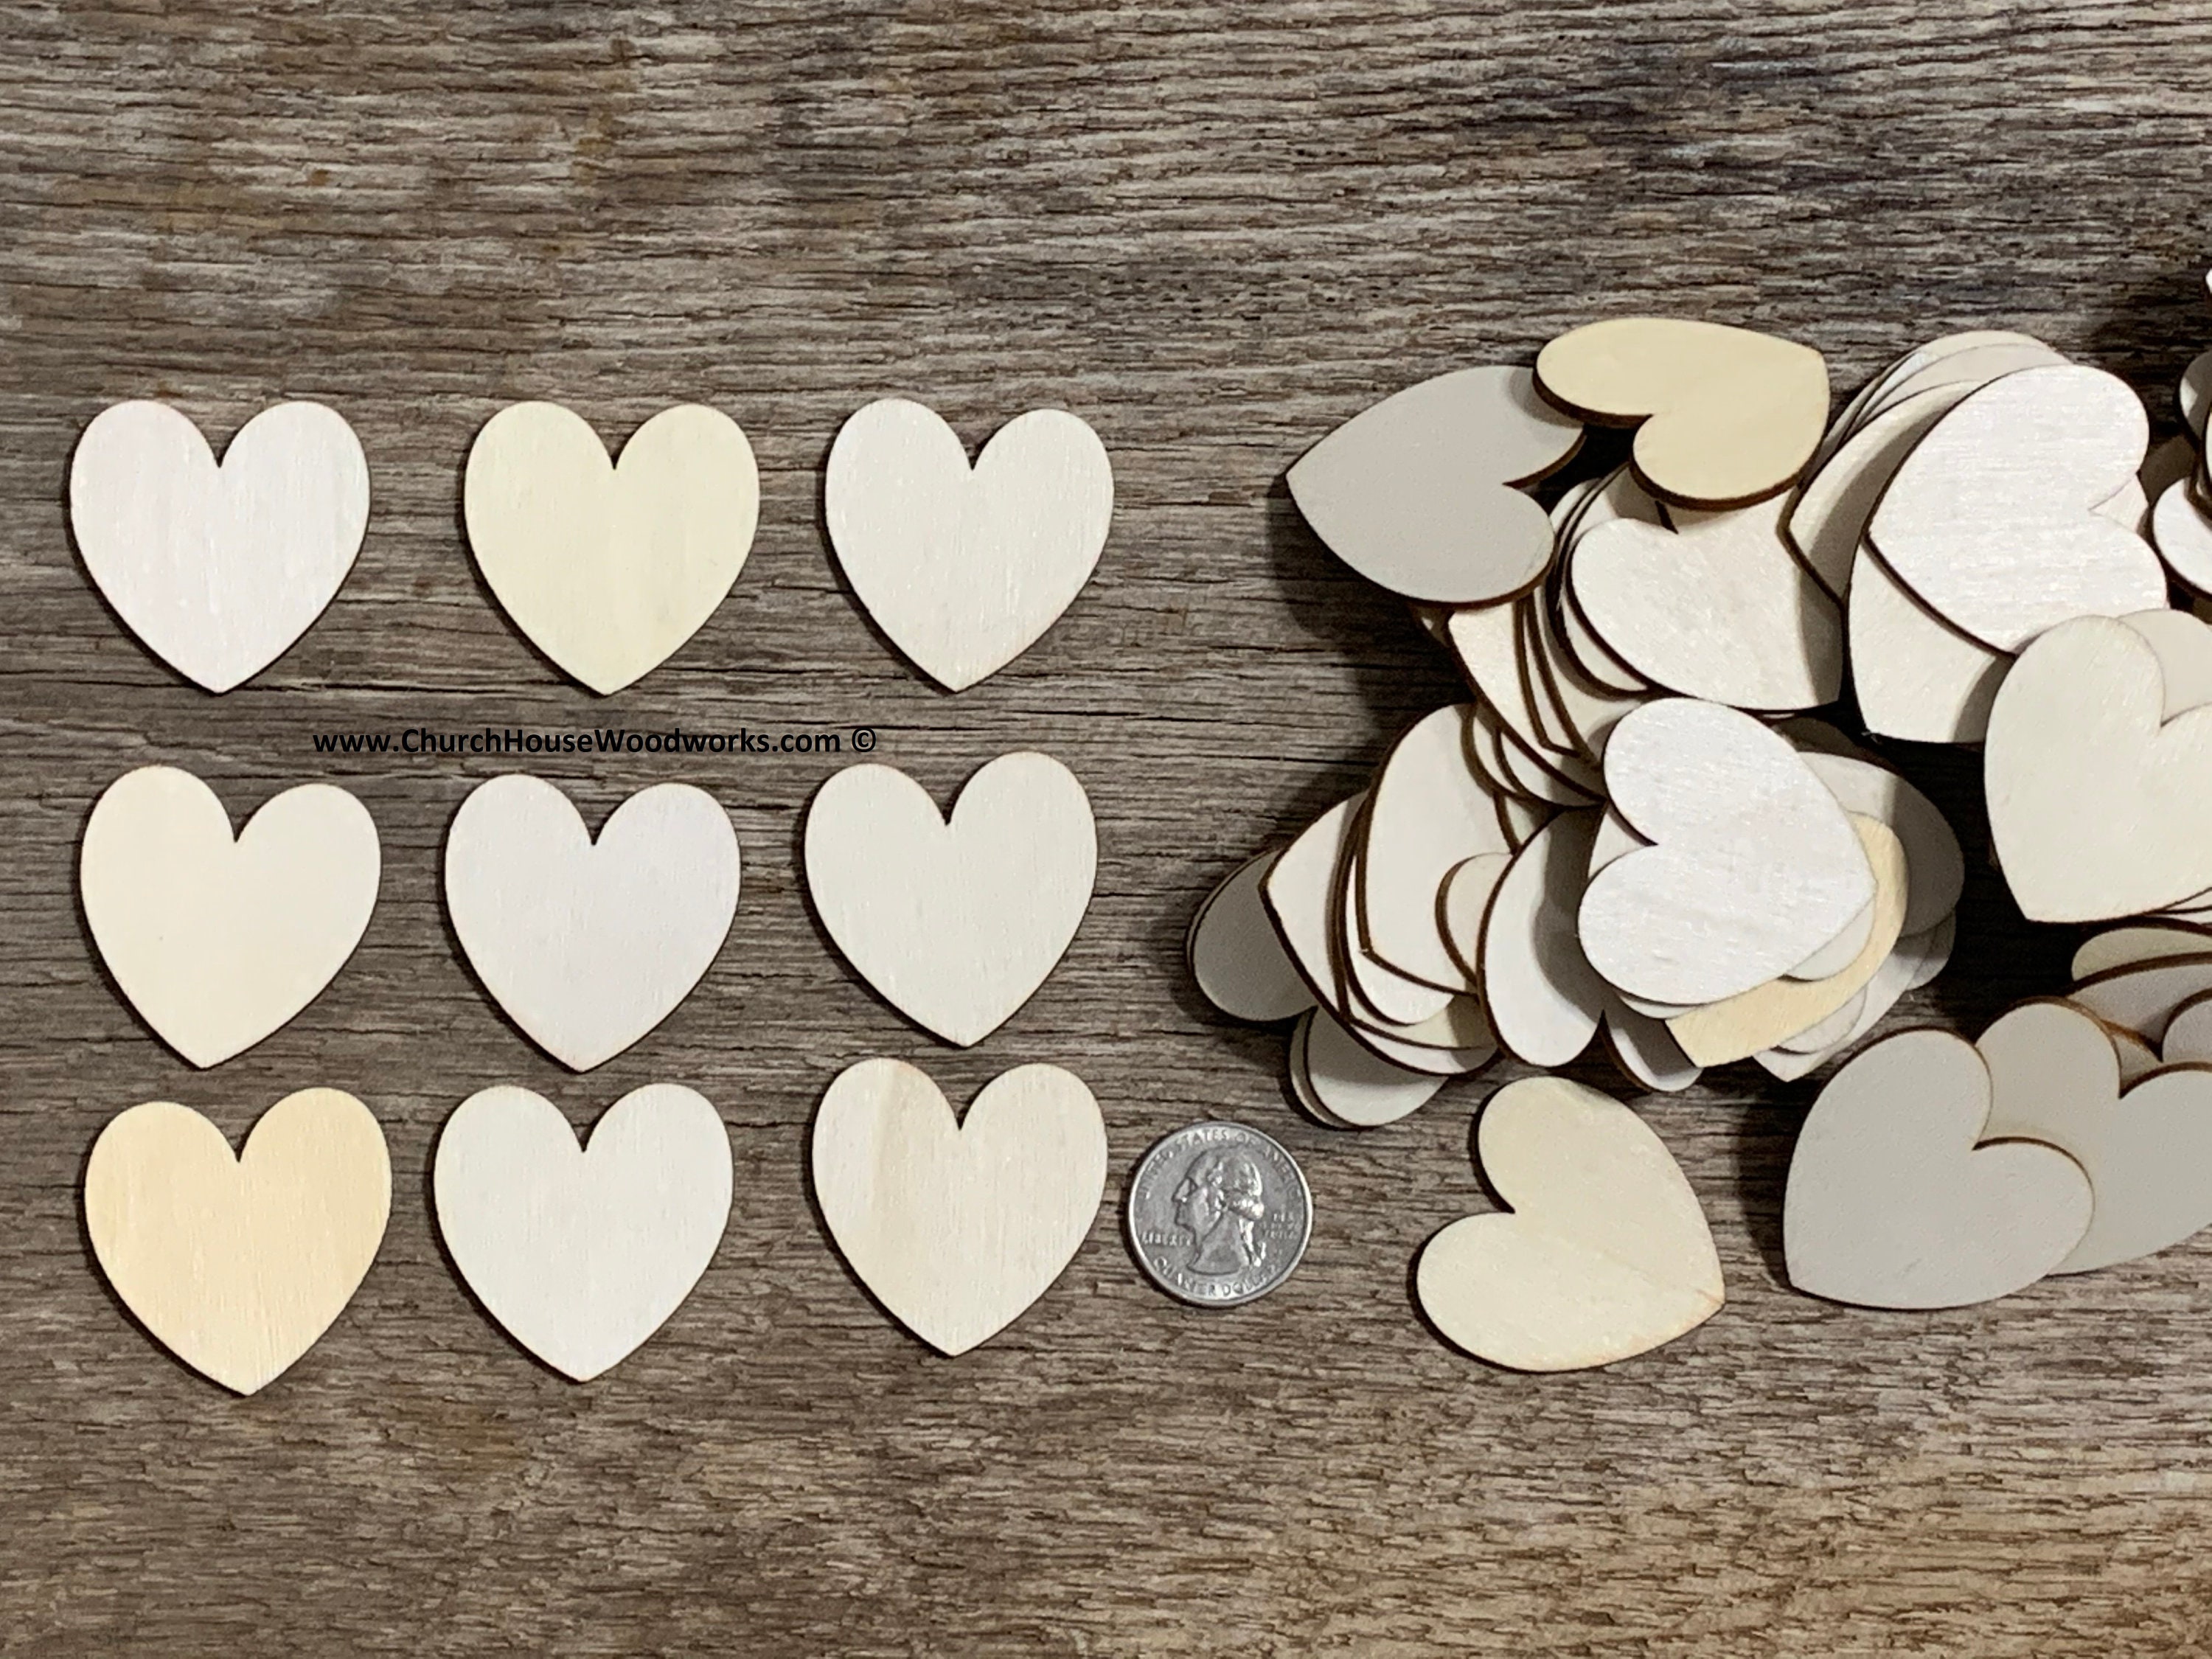 Small Wooden Hearts 1/2”, 1/8” Thick